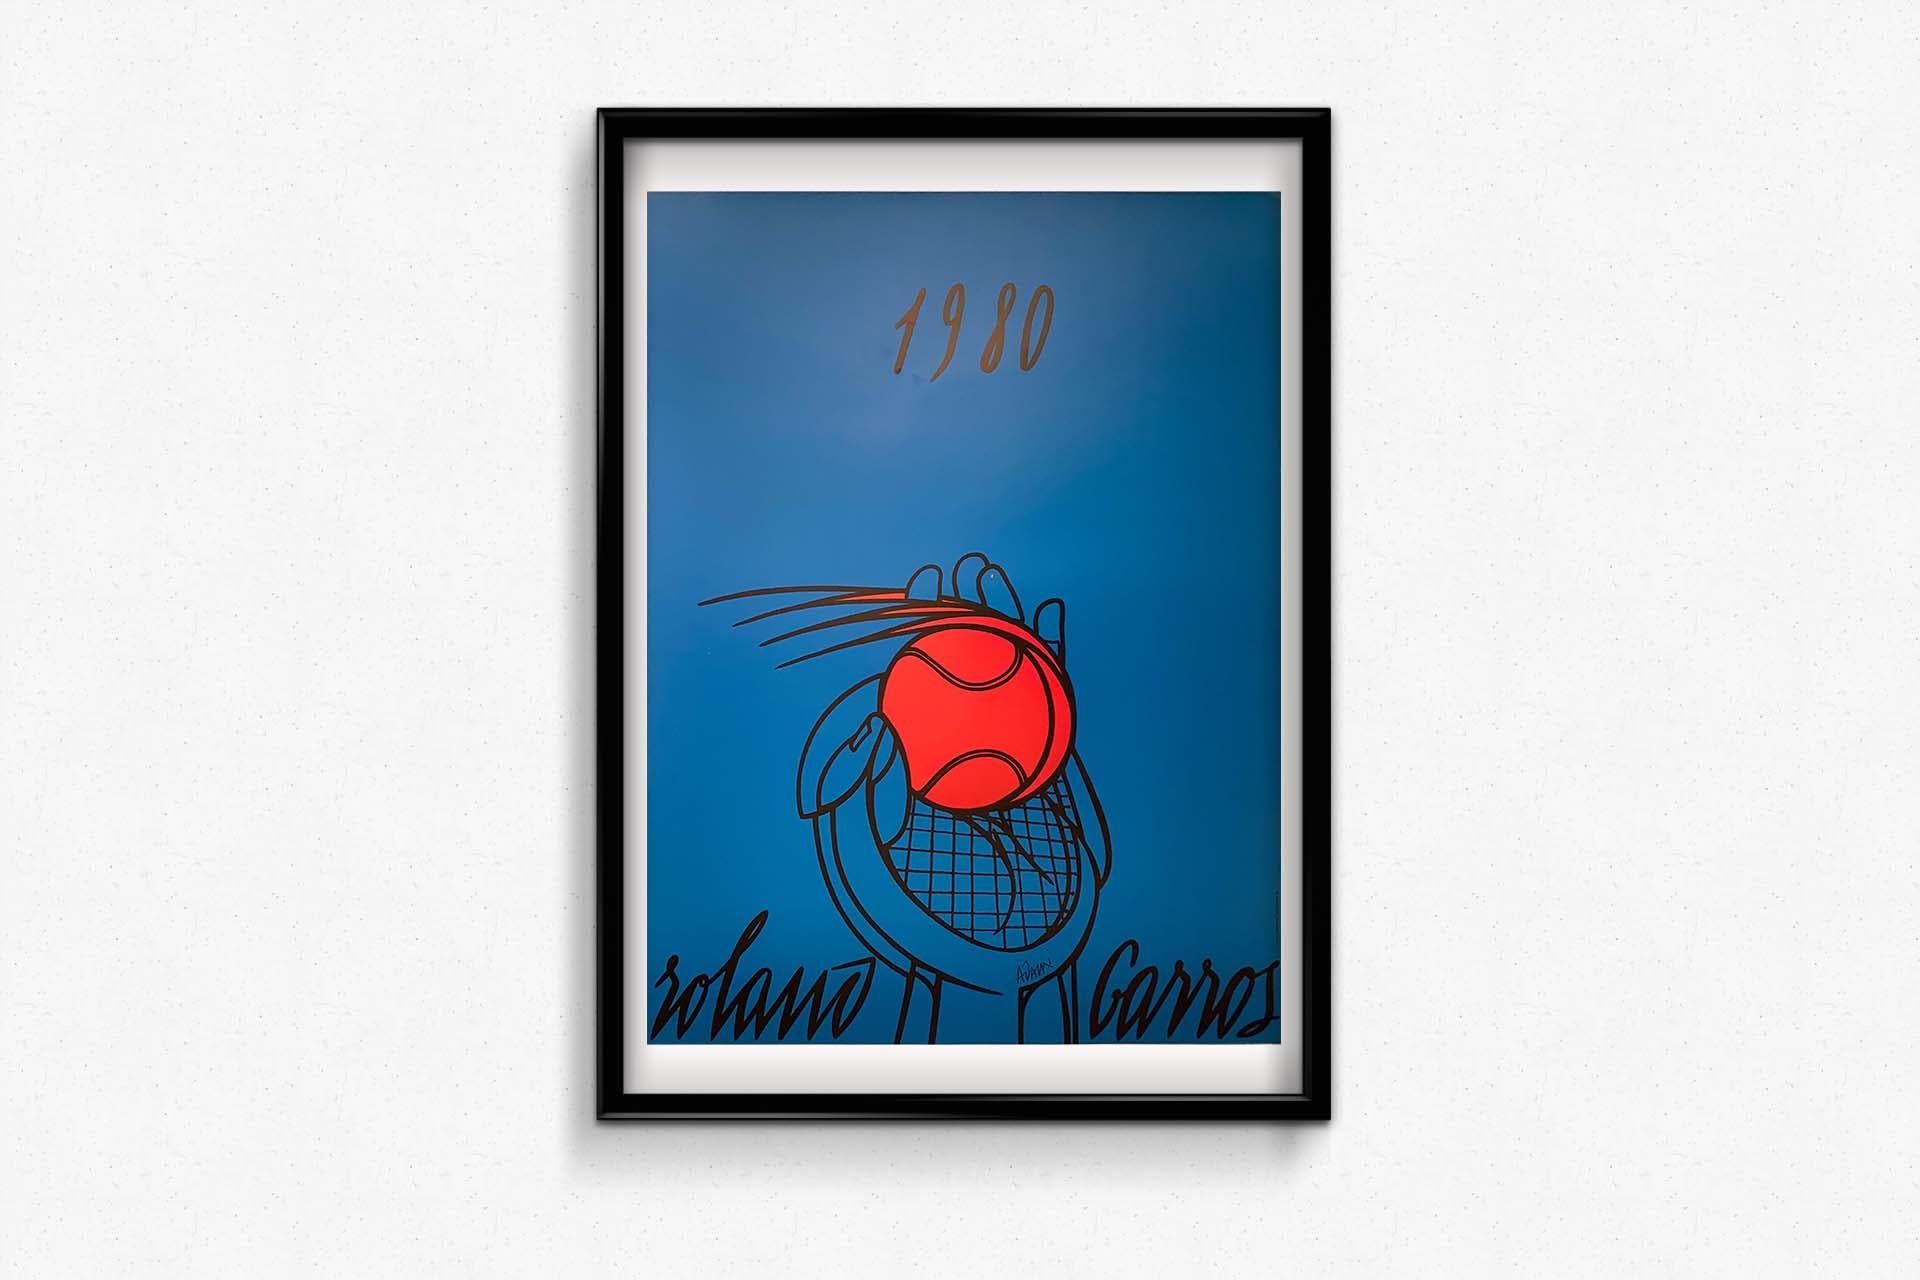 Original poster by Adami to promote the French Tennis Open of 1980 Roland Garros For Sale 1